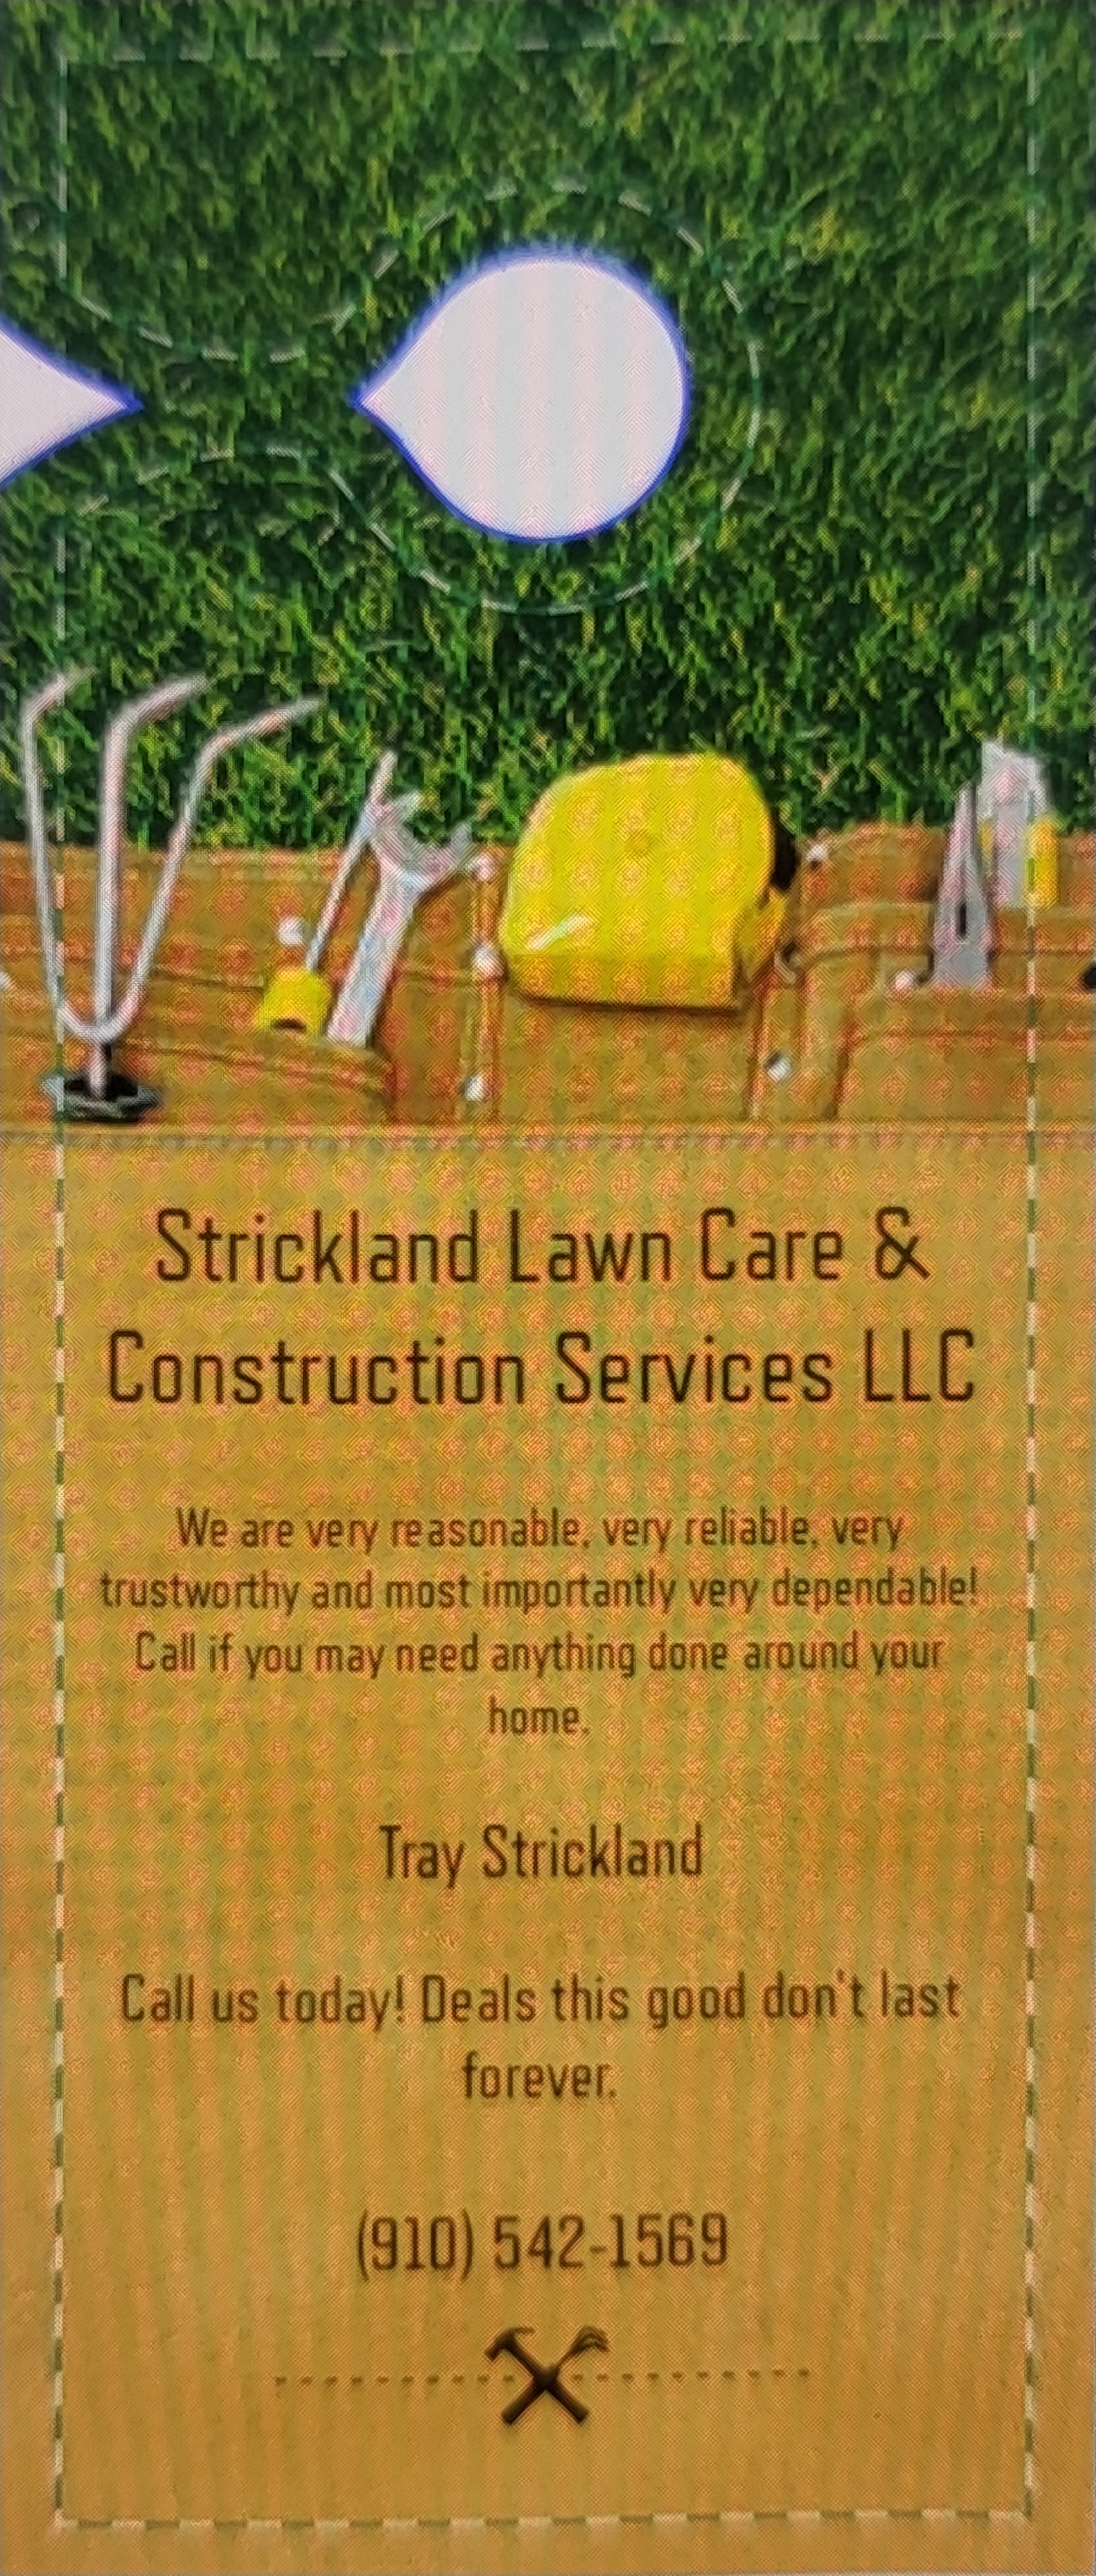 Strickland Lawn Care and Construction Services Logo